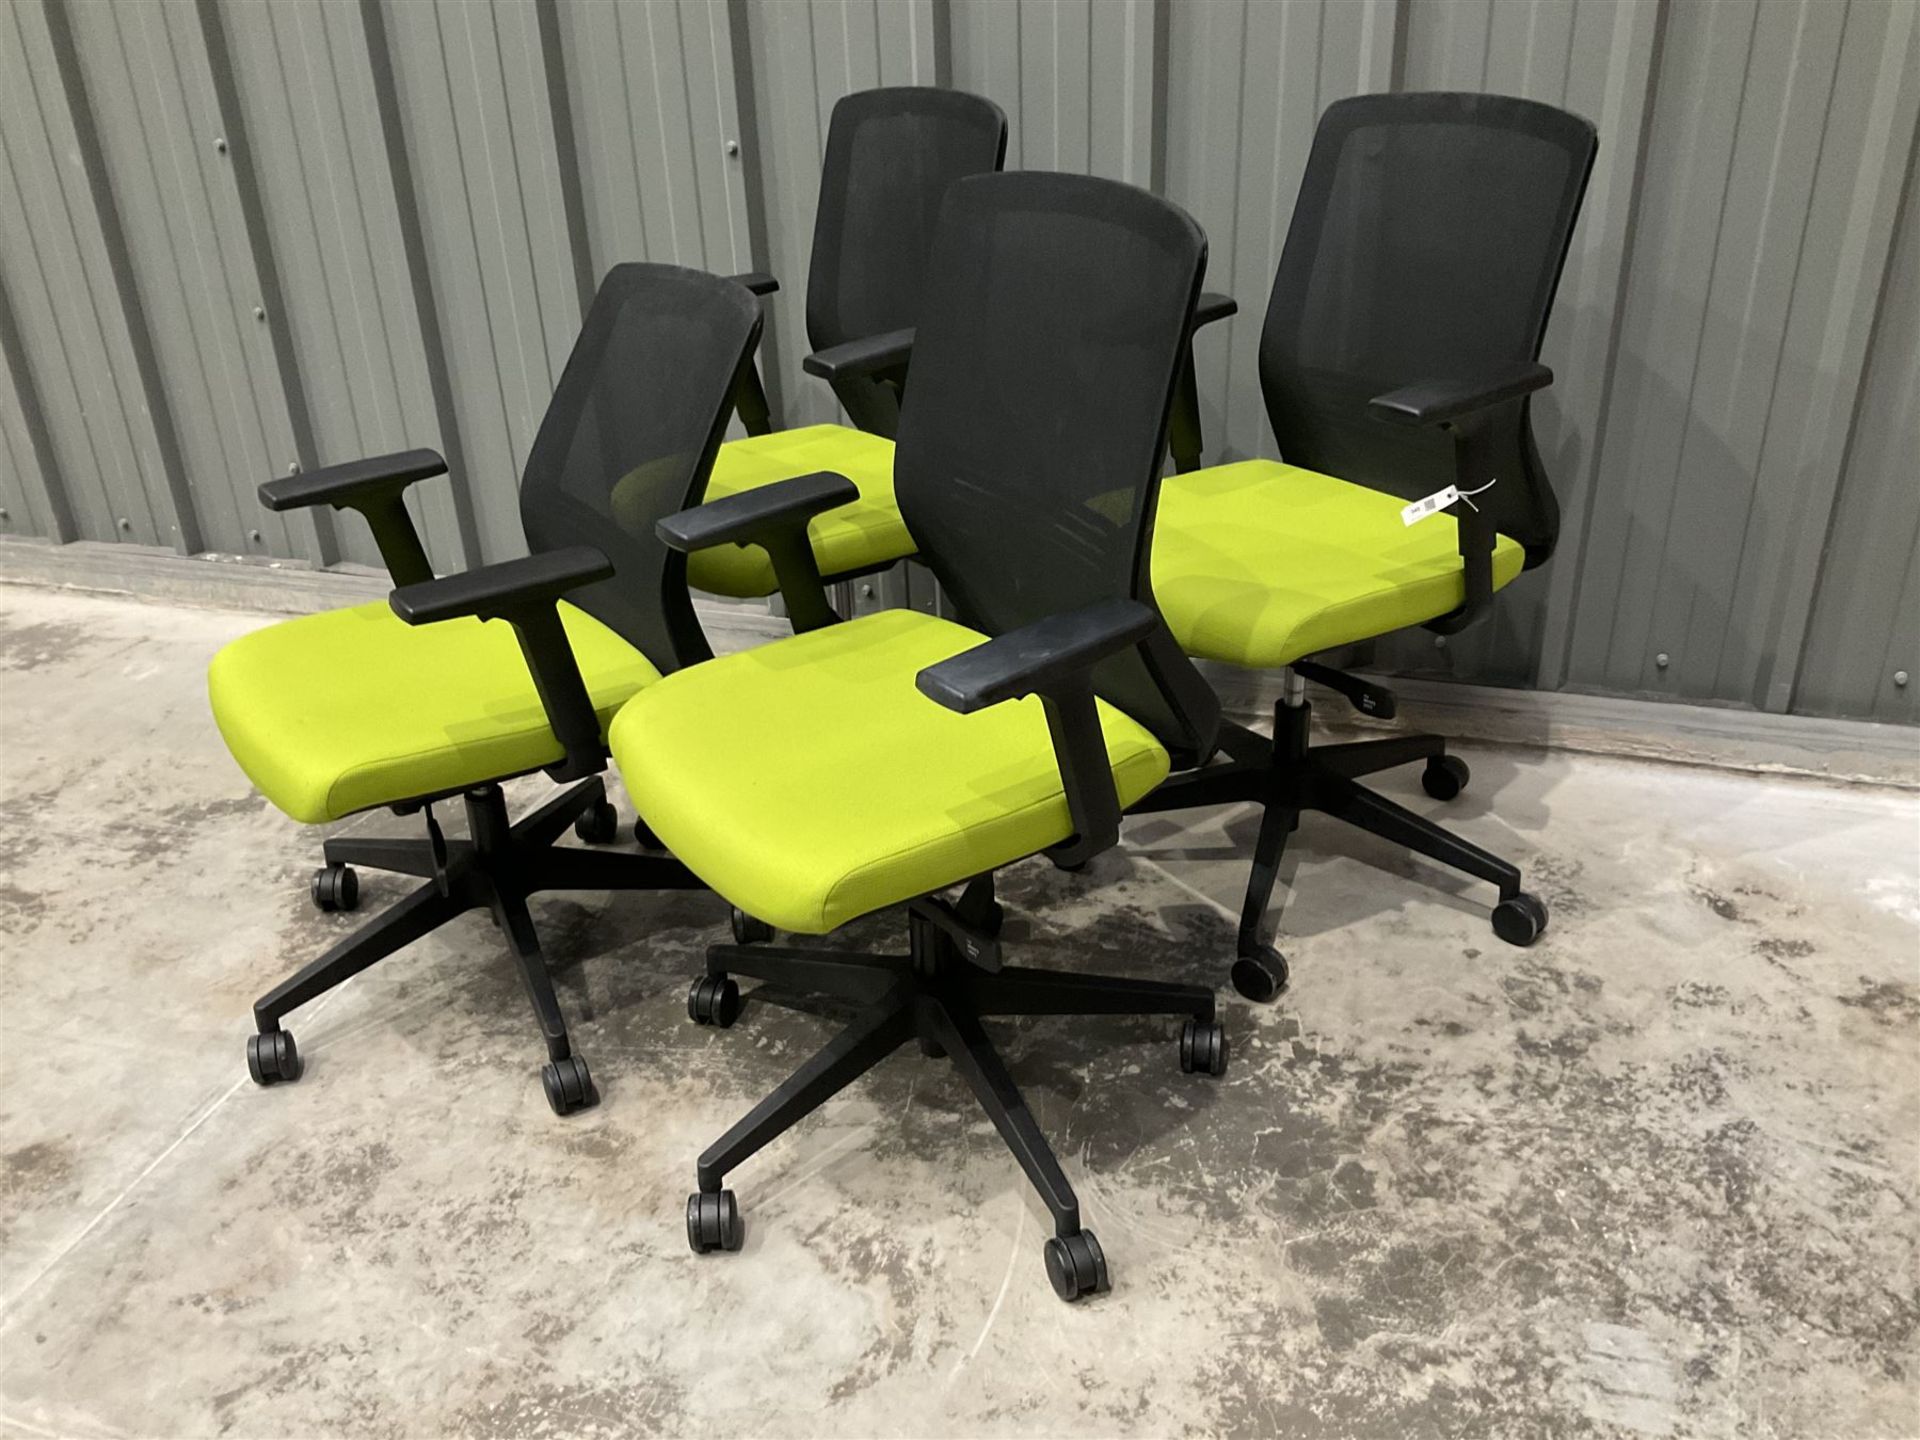 Five swivel adjustable office chairs - Image 2 of 3